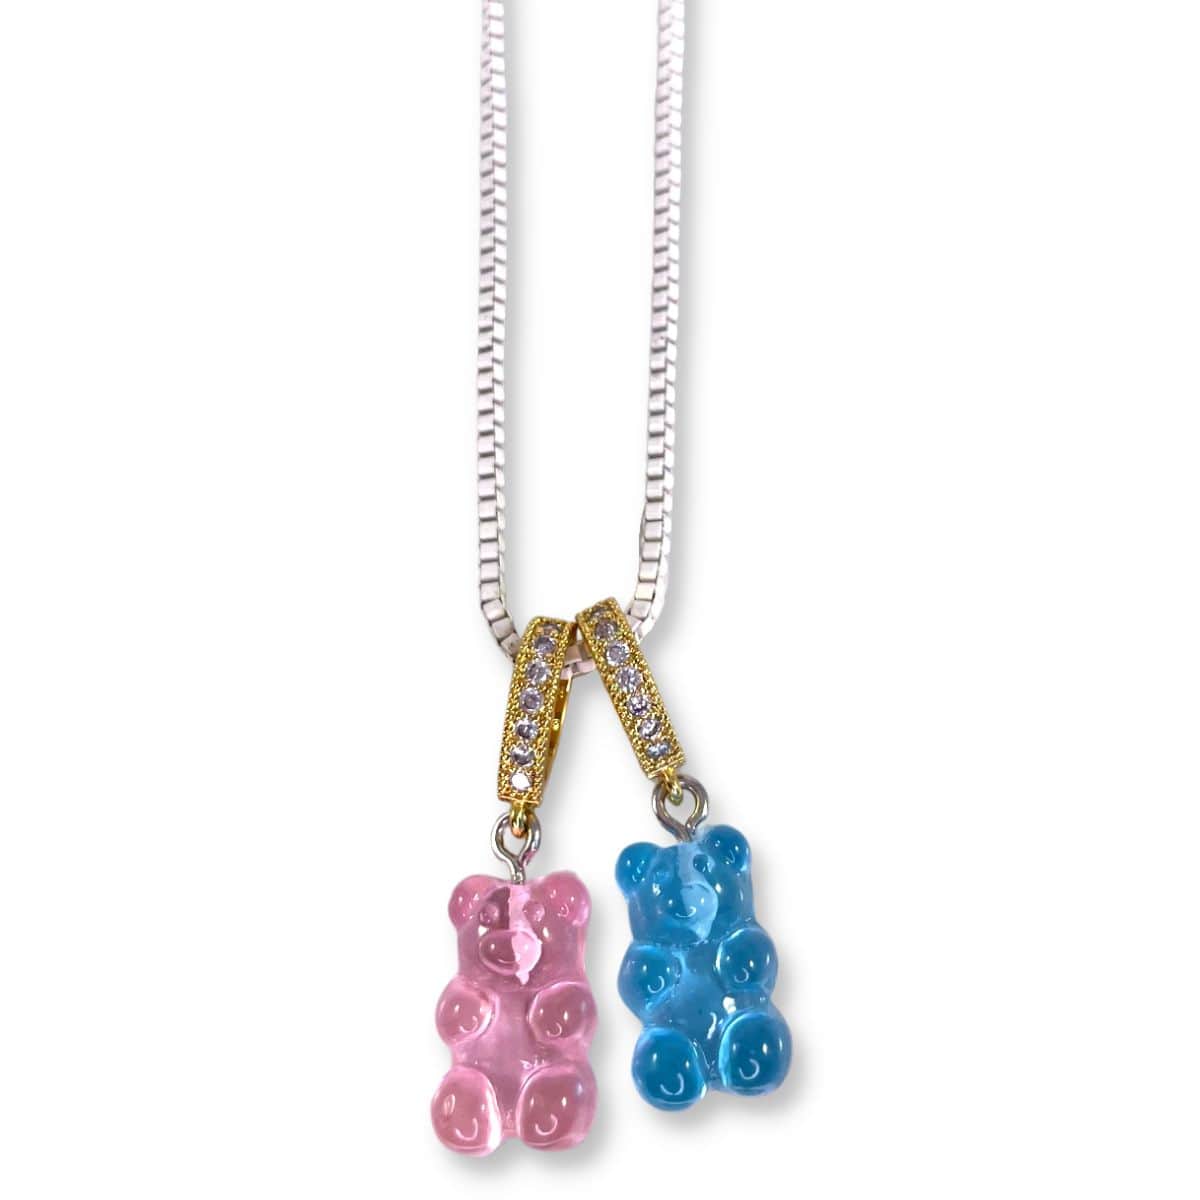 cotton candy double bear necklace with white box chain - Gummy Bear Bling